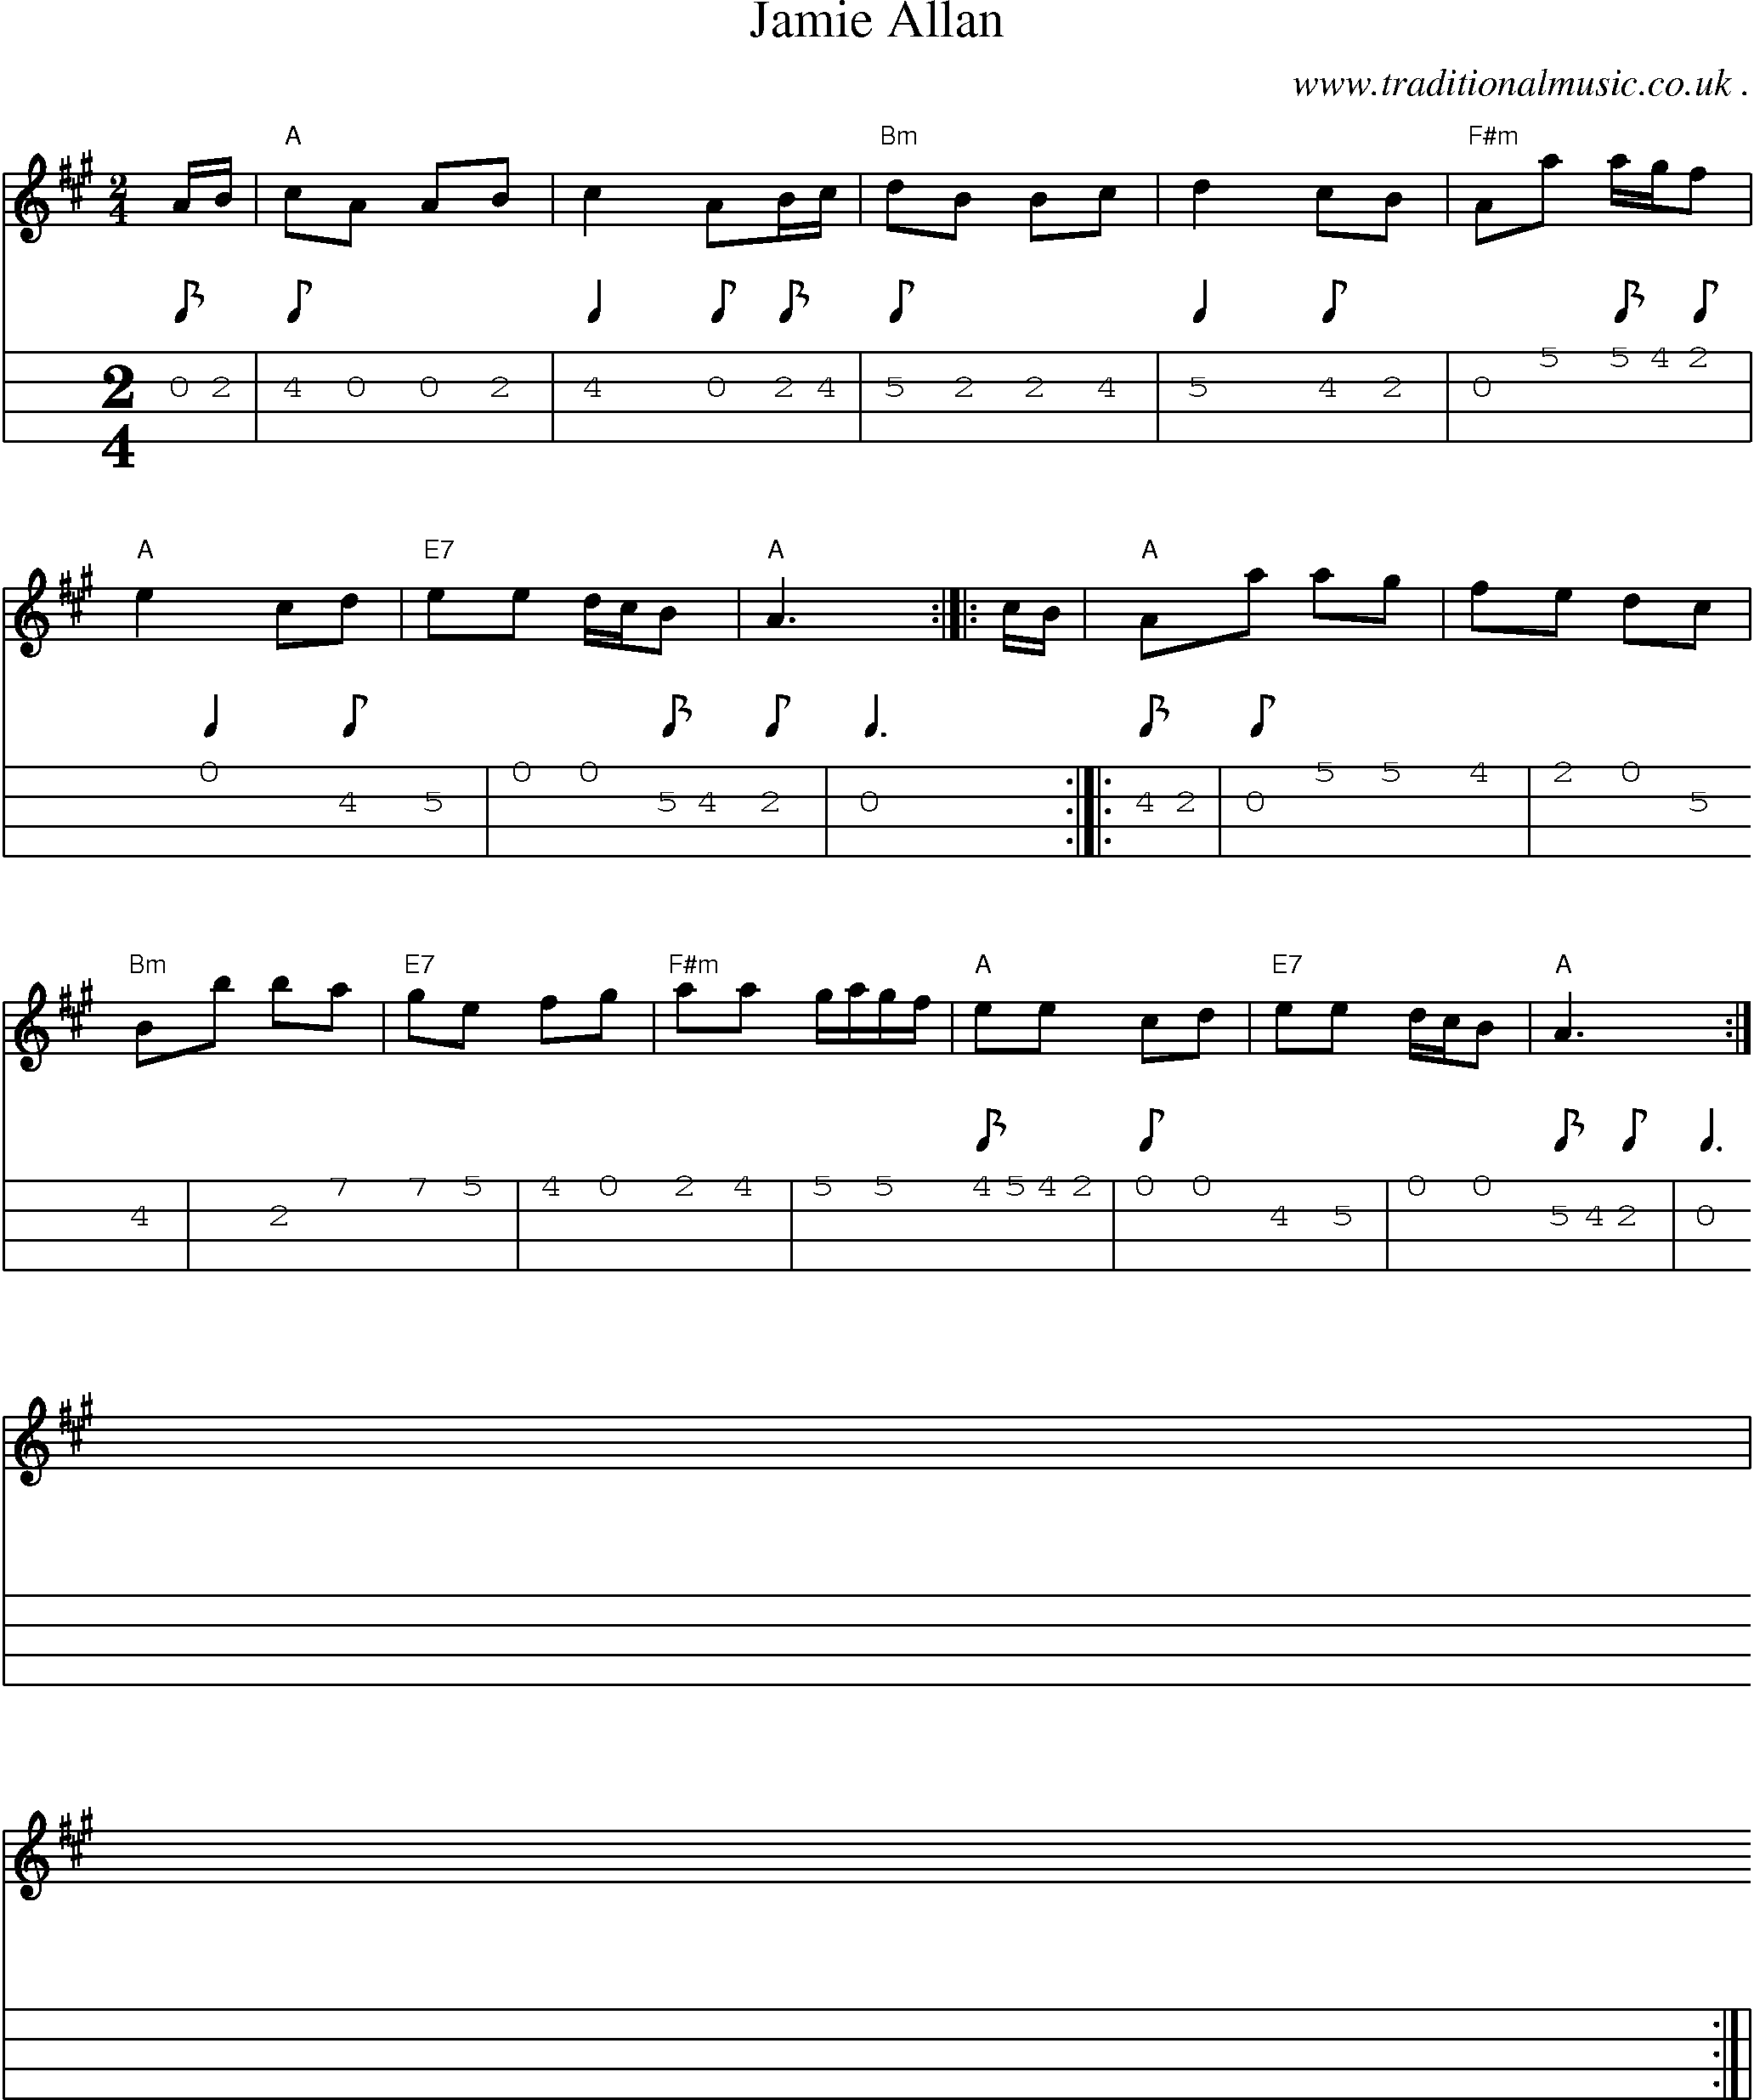 Sheet-music  score, Chords and Mandolin Tabs for Jamie Allan